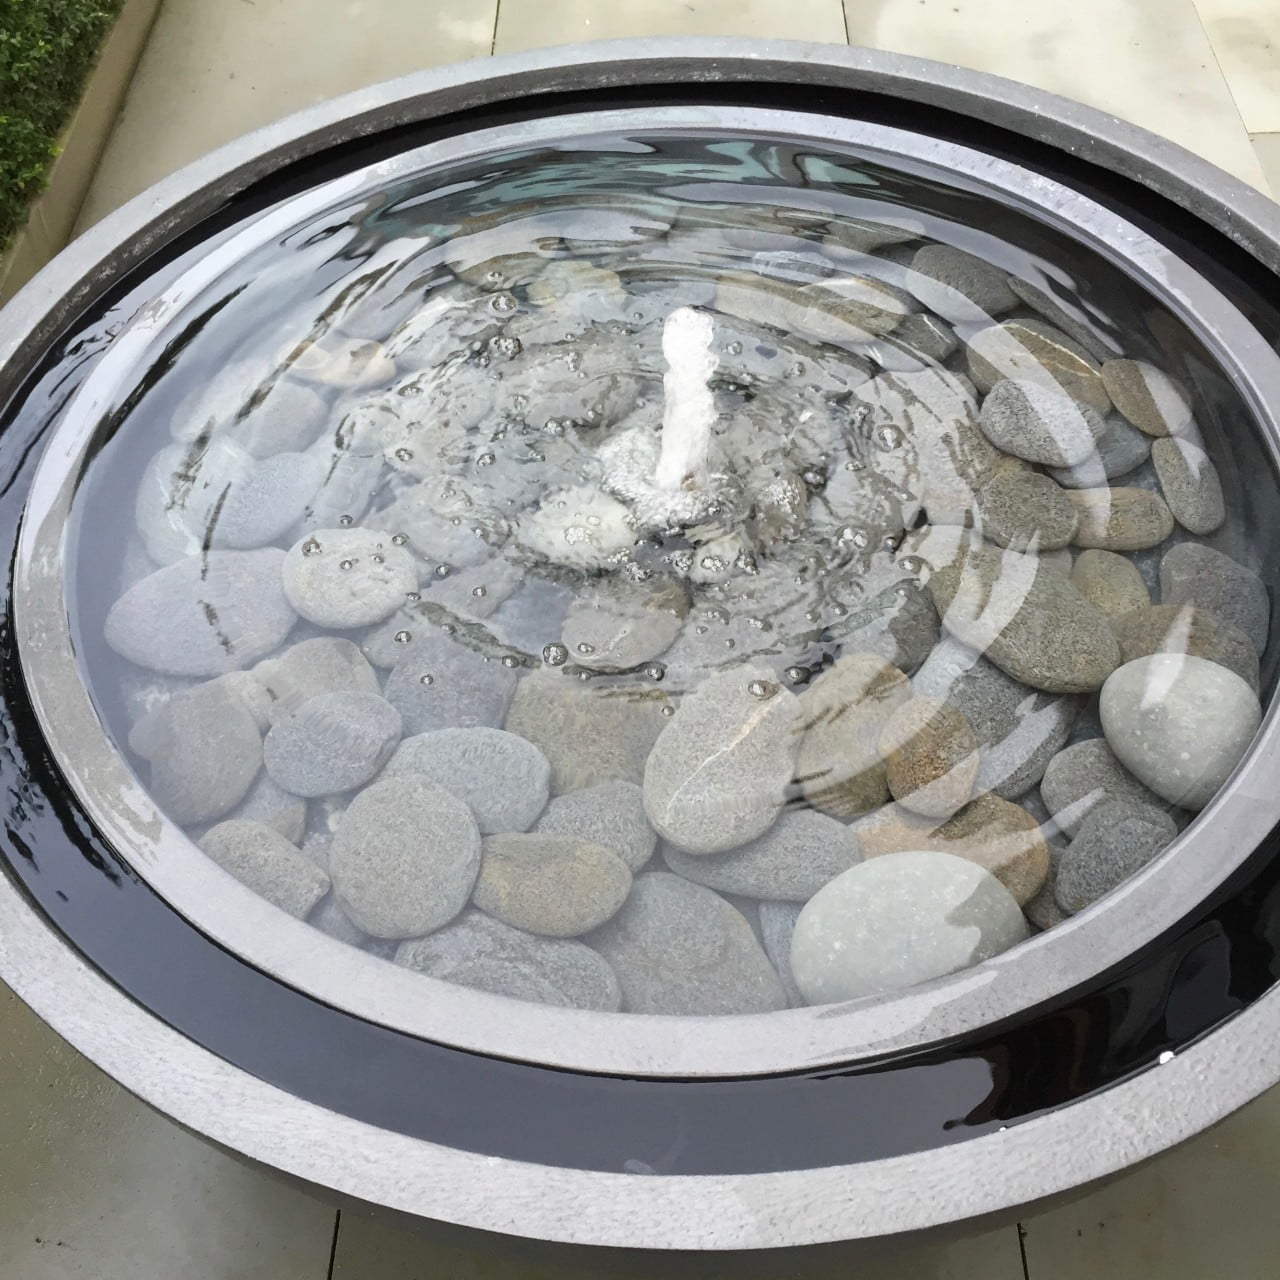 This is a large water bowl water feature in our own courtyard garden here in newbury